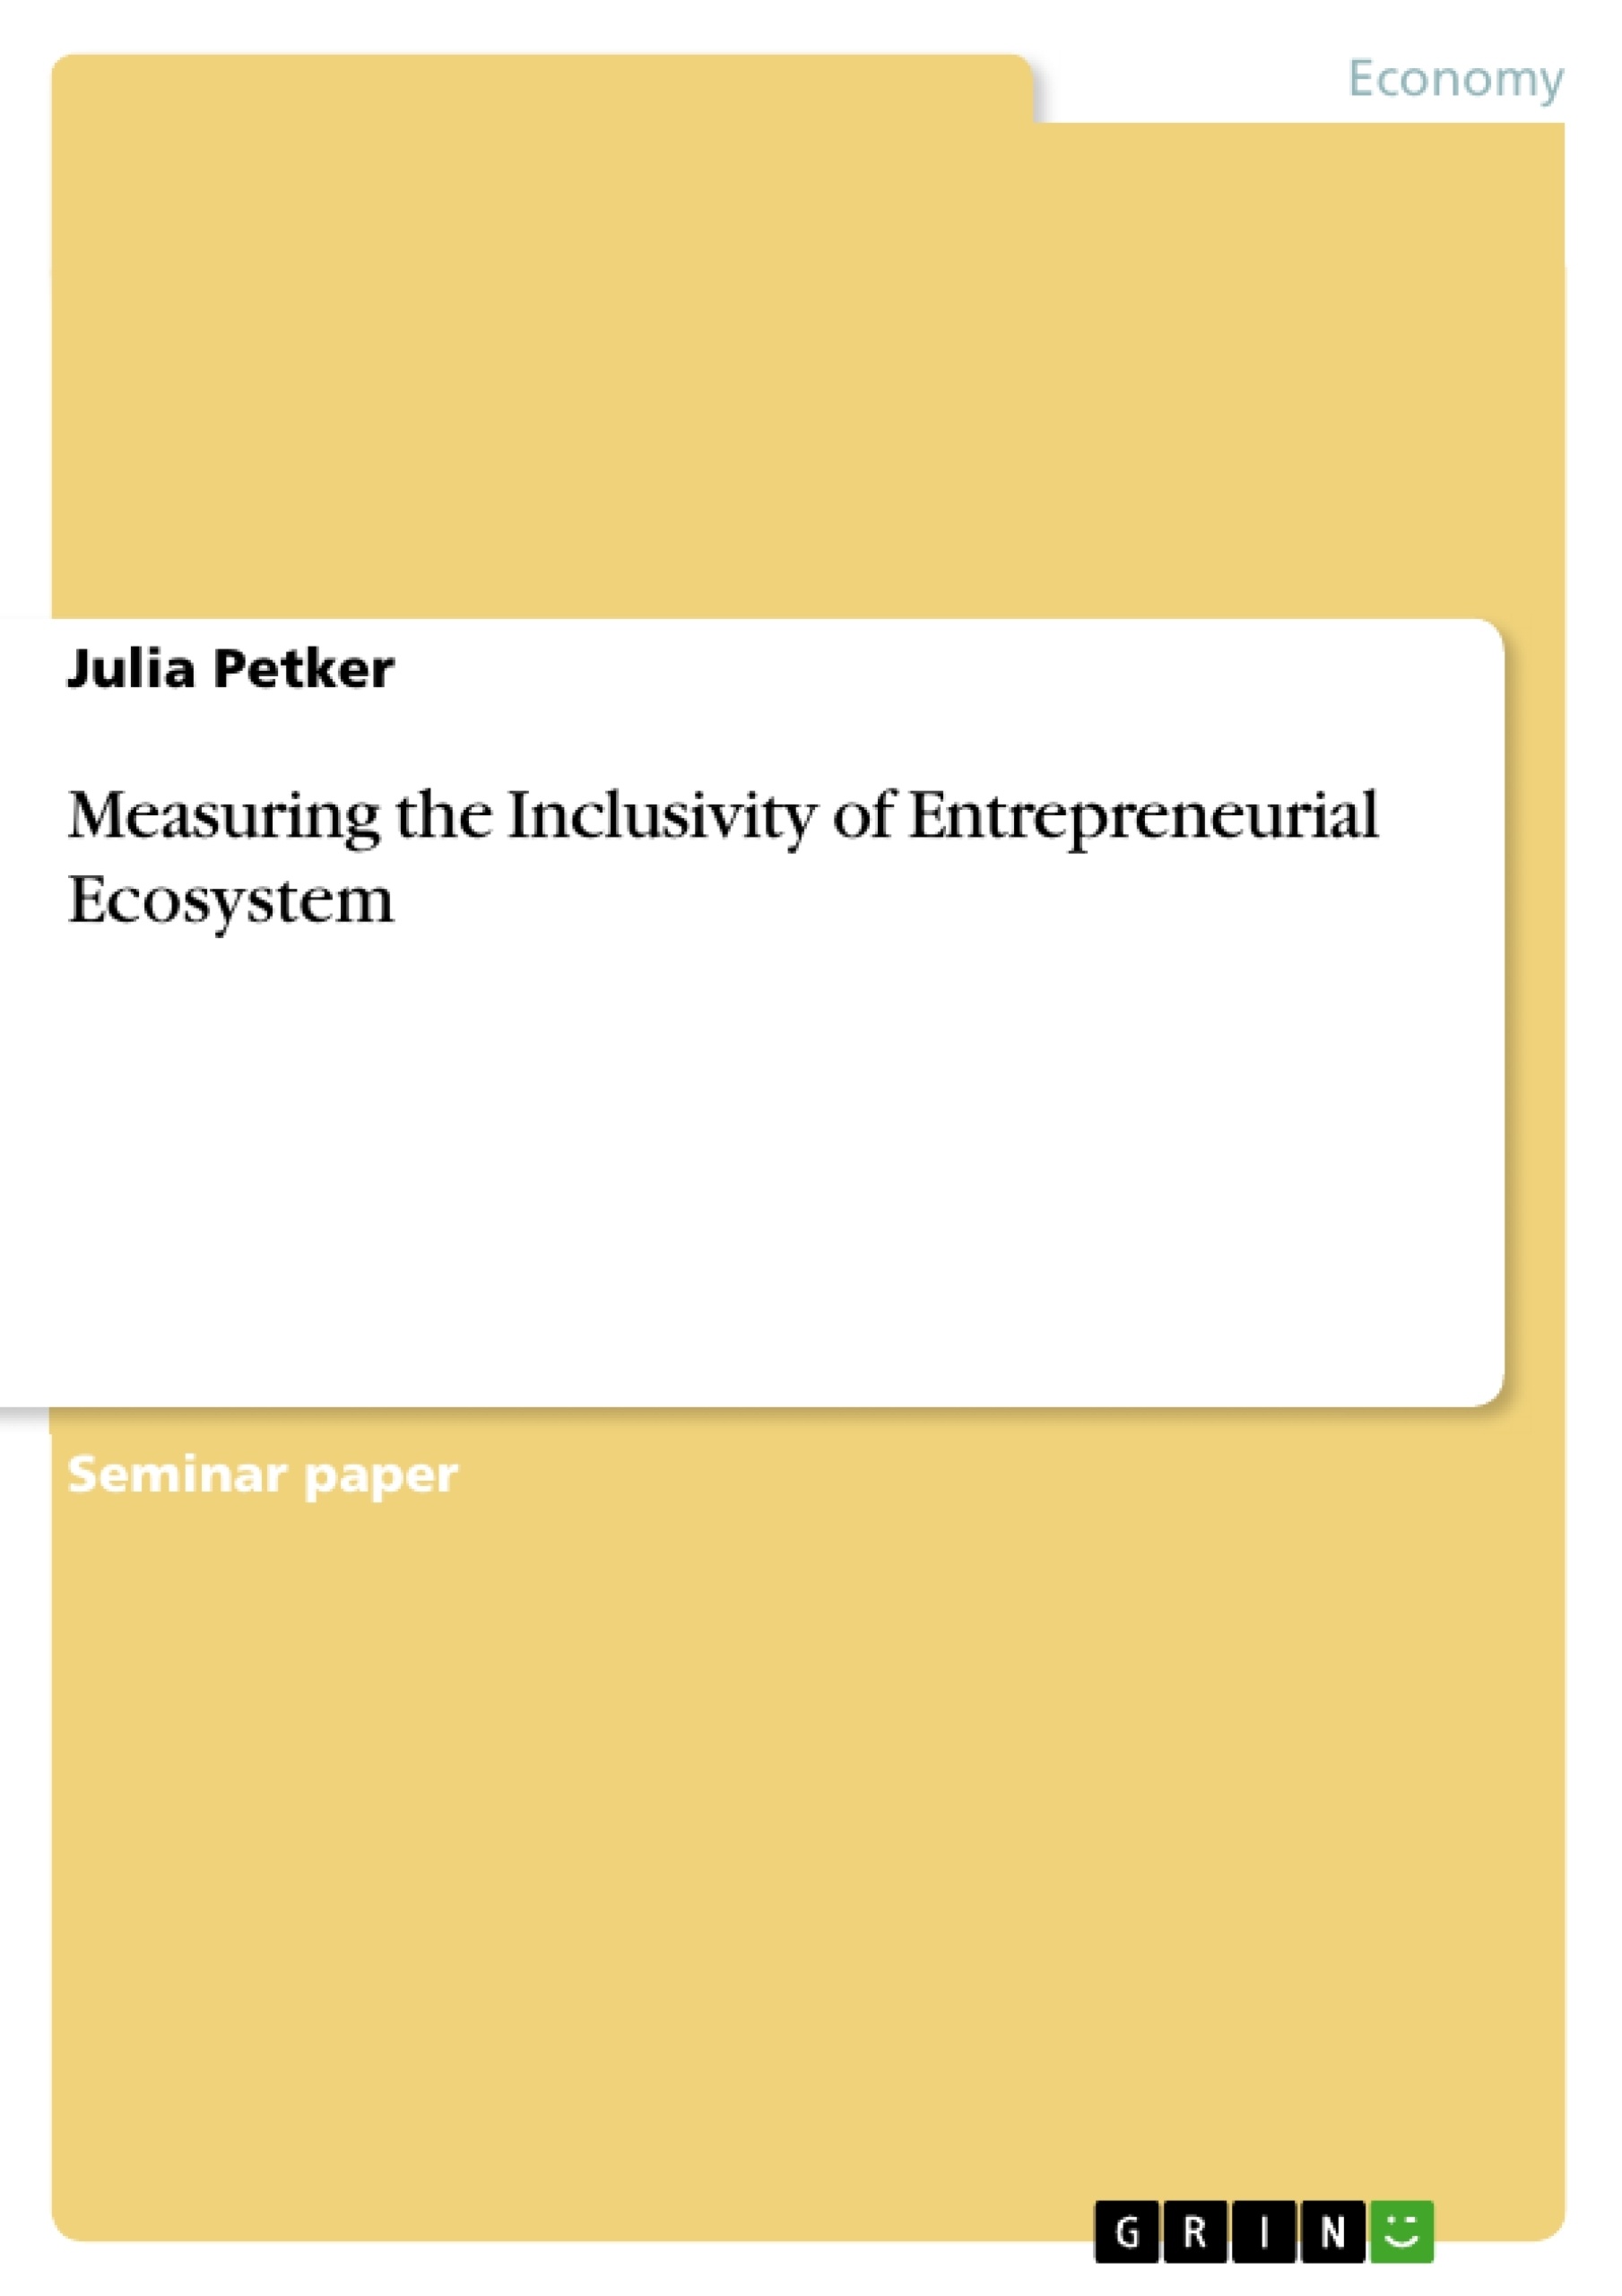 Title: Measuring the Inclusivity of Entrepreneurial Ecosystem